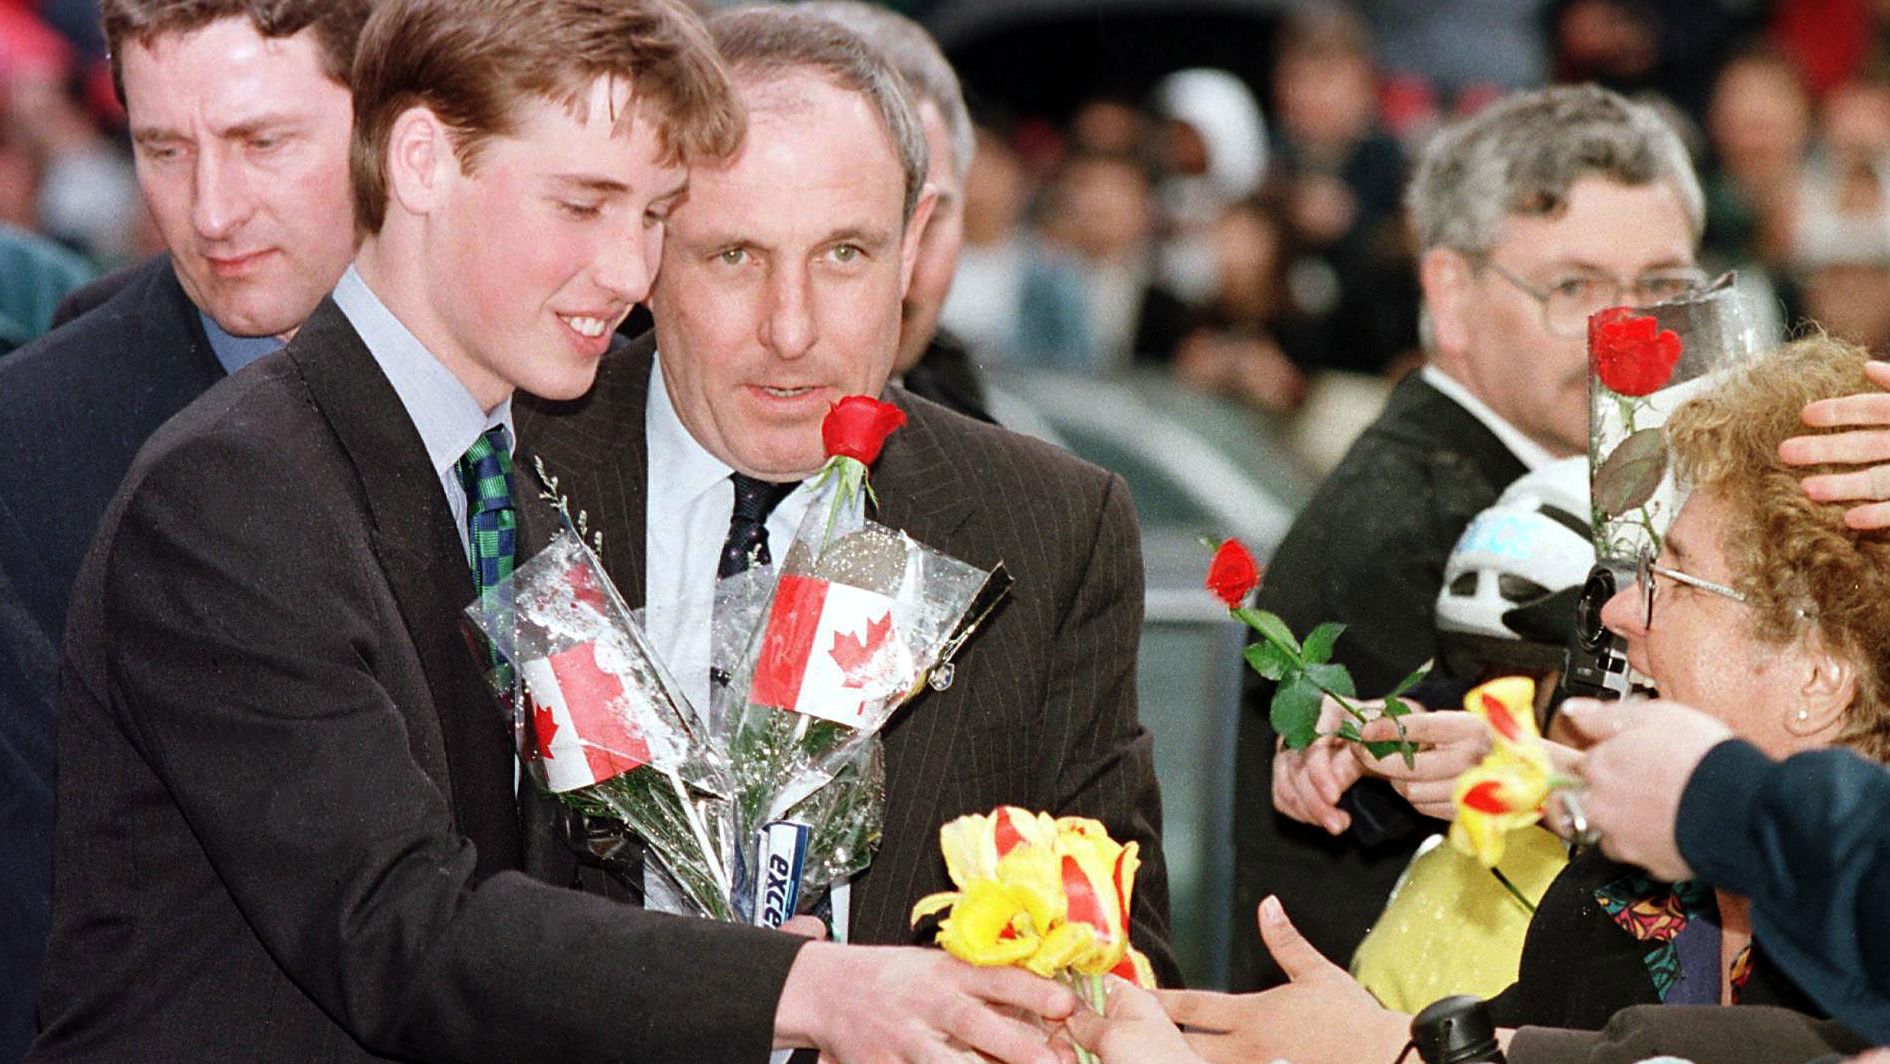 Prince William receives flowers from an adoring crowd in Vancouver, British Columbia, in 1998. He was on a weeklong vacation with his father and brother, though they also made time for official engagements.